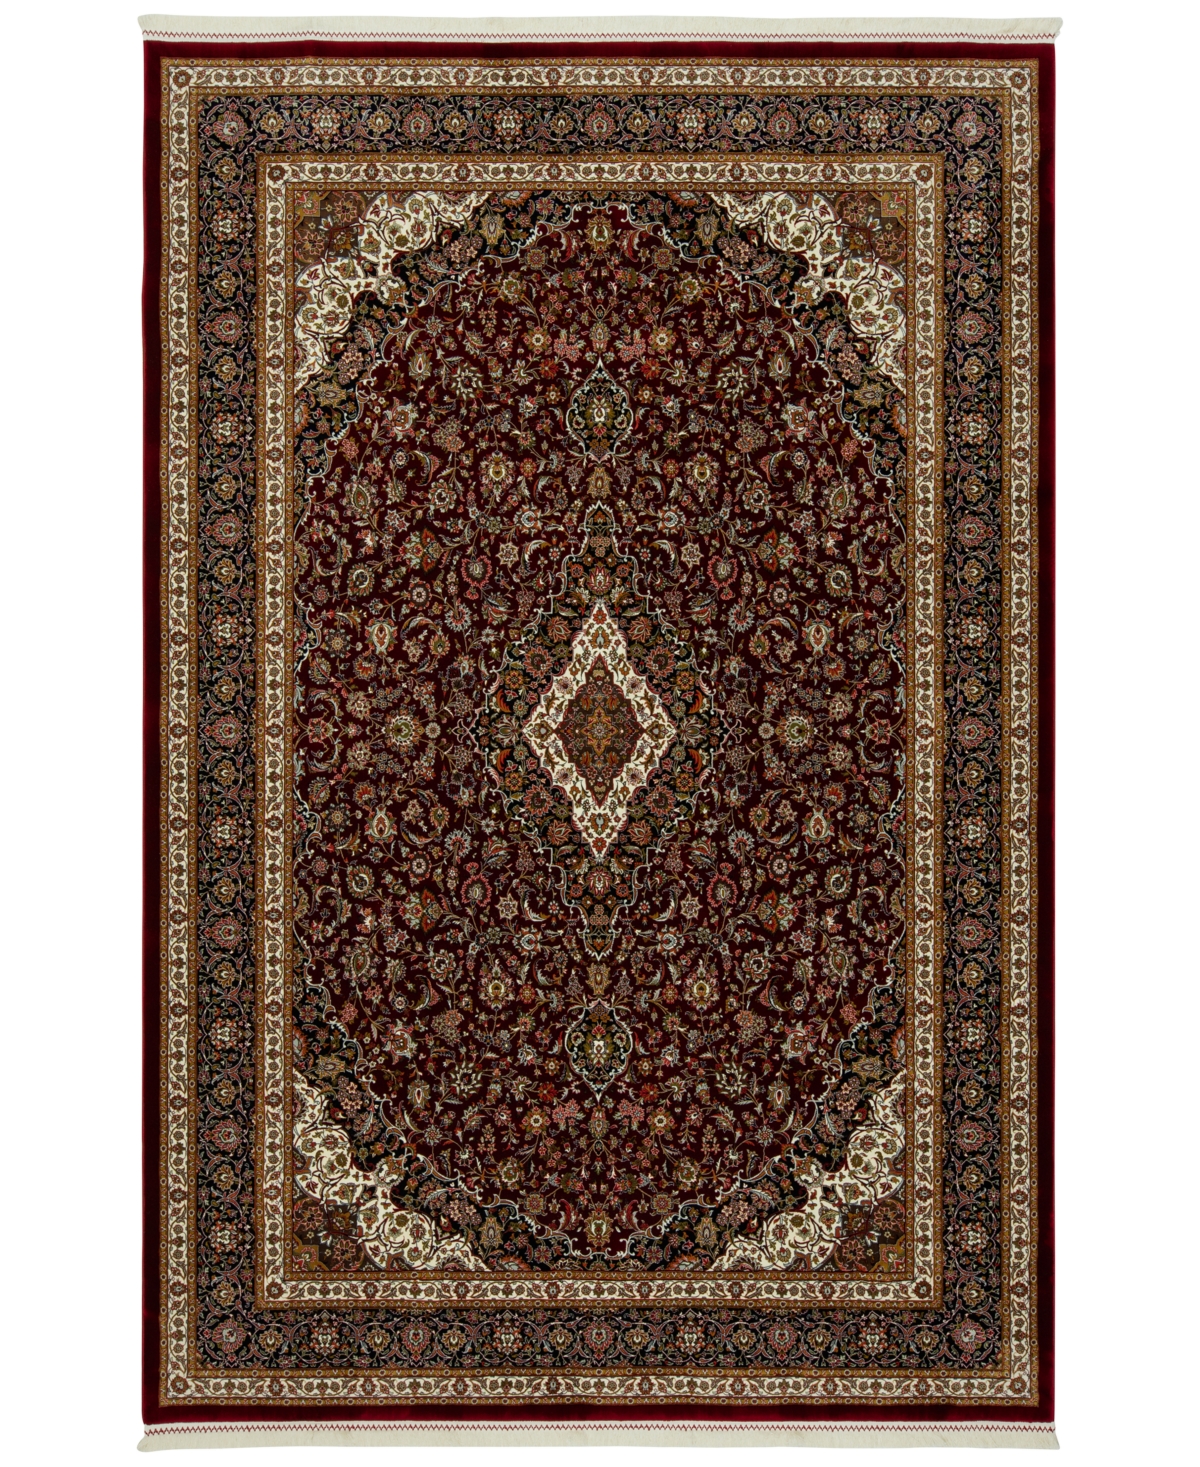 Kenneth Mink Persian Treasures Kashan 8' X 10' Area Rug In Red